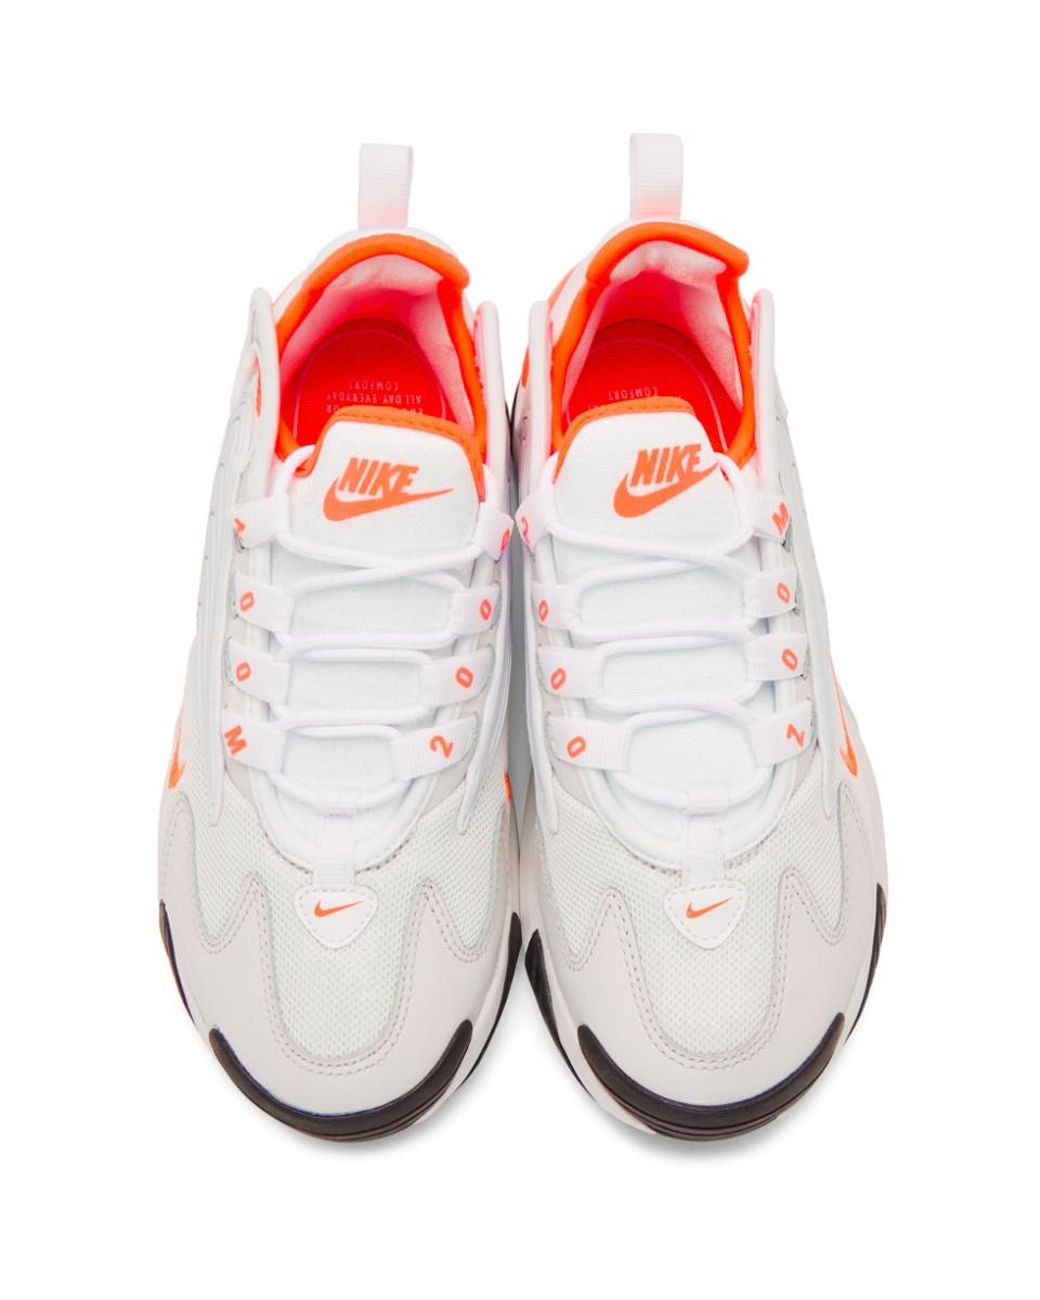 Nike Off-white And Orange Zoom 2k Sneakers | Lyst Canada